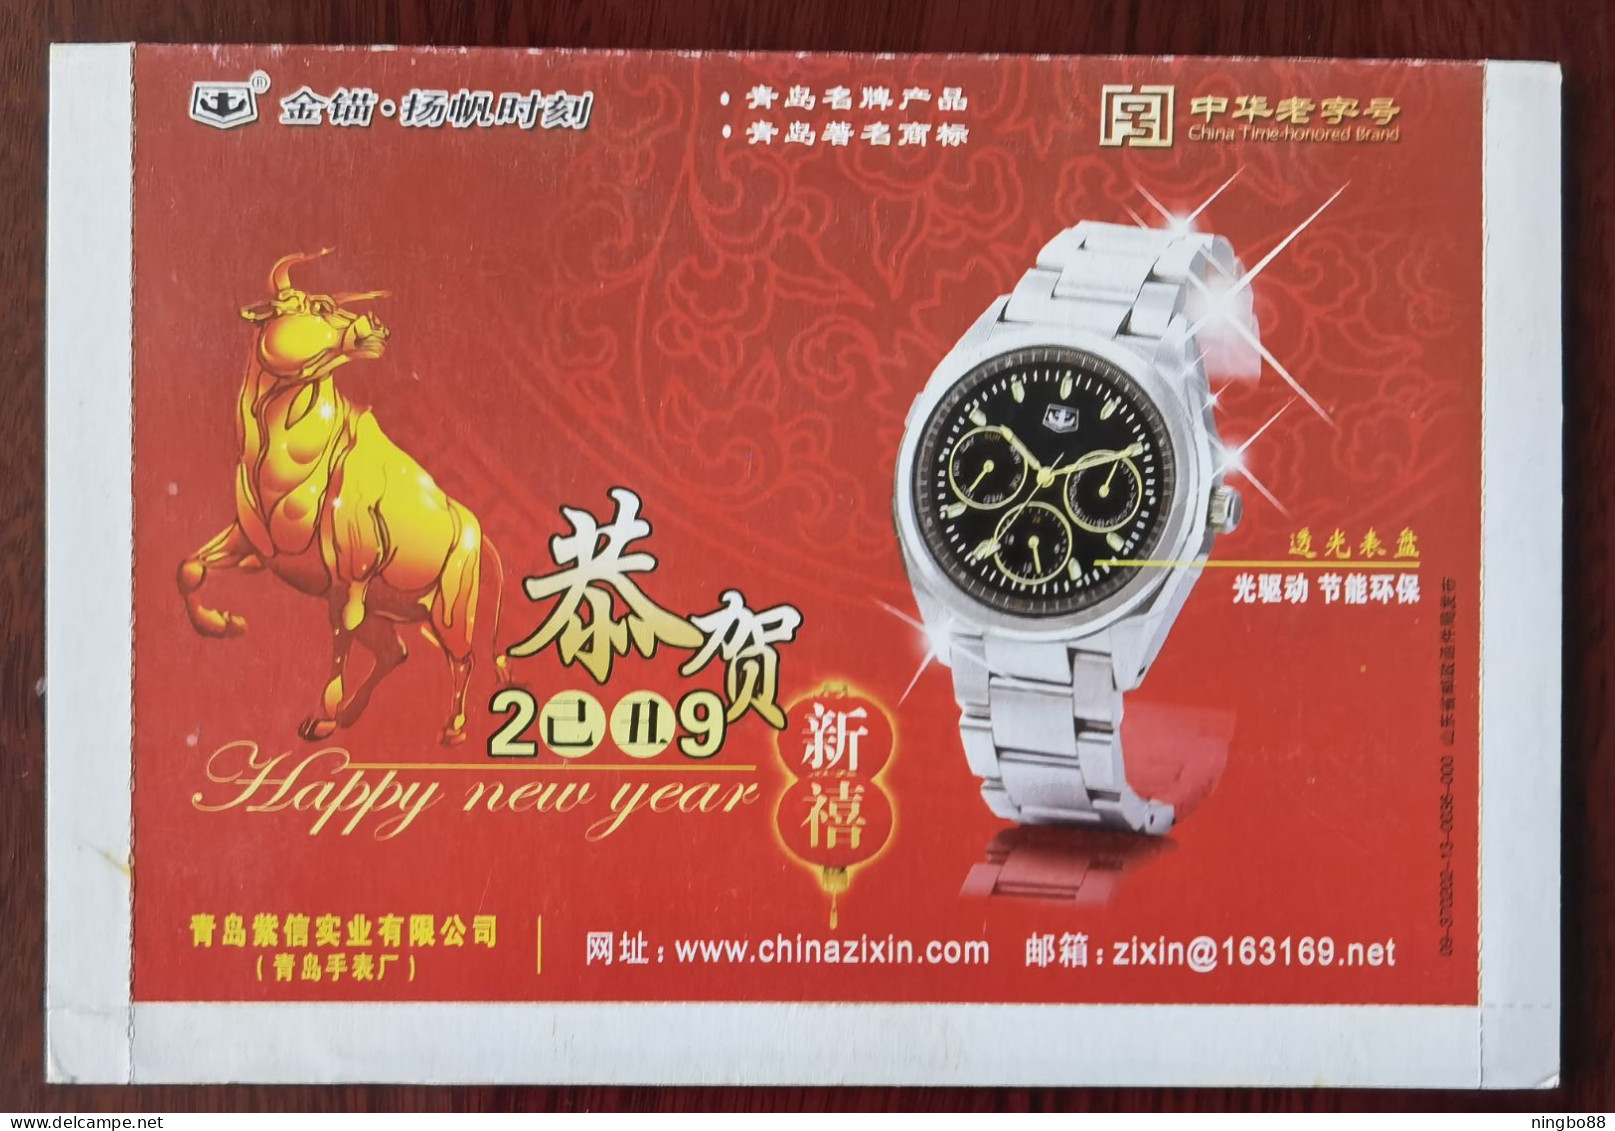 China Time-honored Brand Golden Anchor Photokinetic Energy Watch,China 2009 Qingdao Watch Factory Advertising PSL - Orologeria